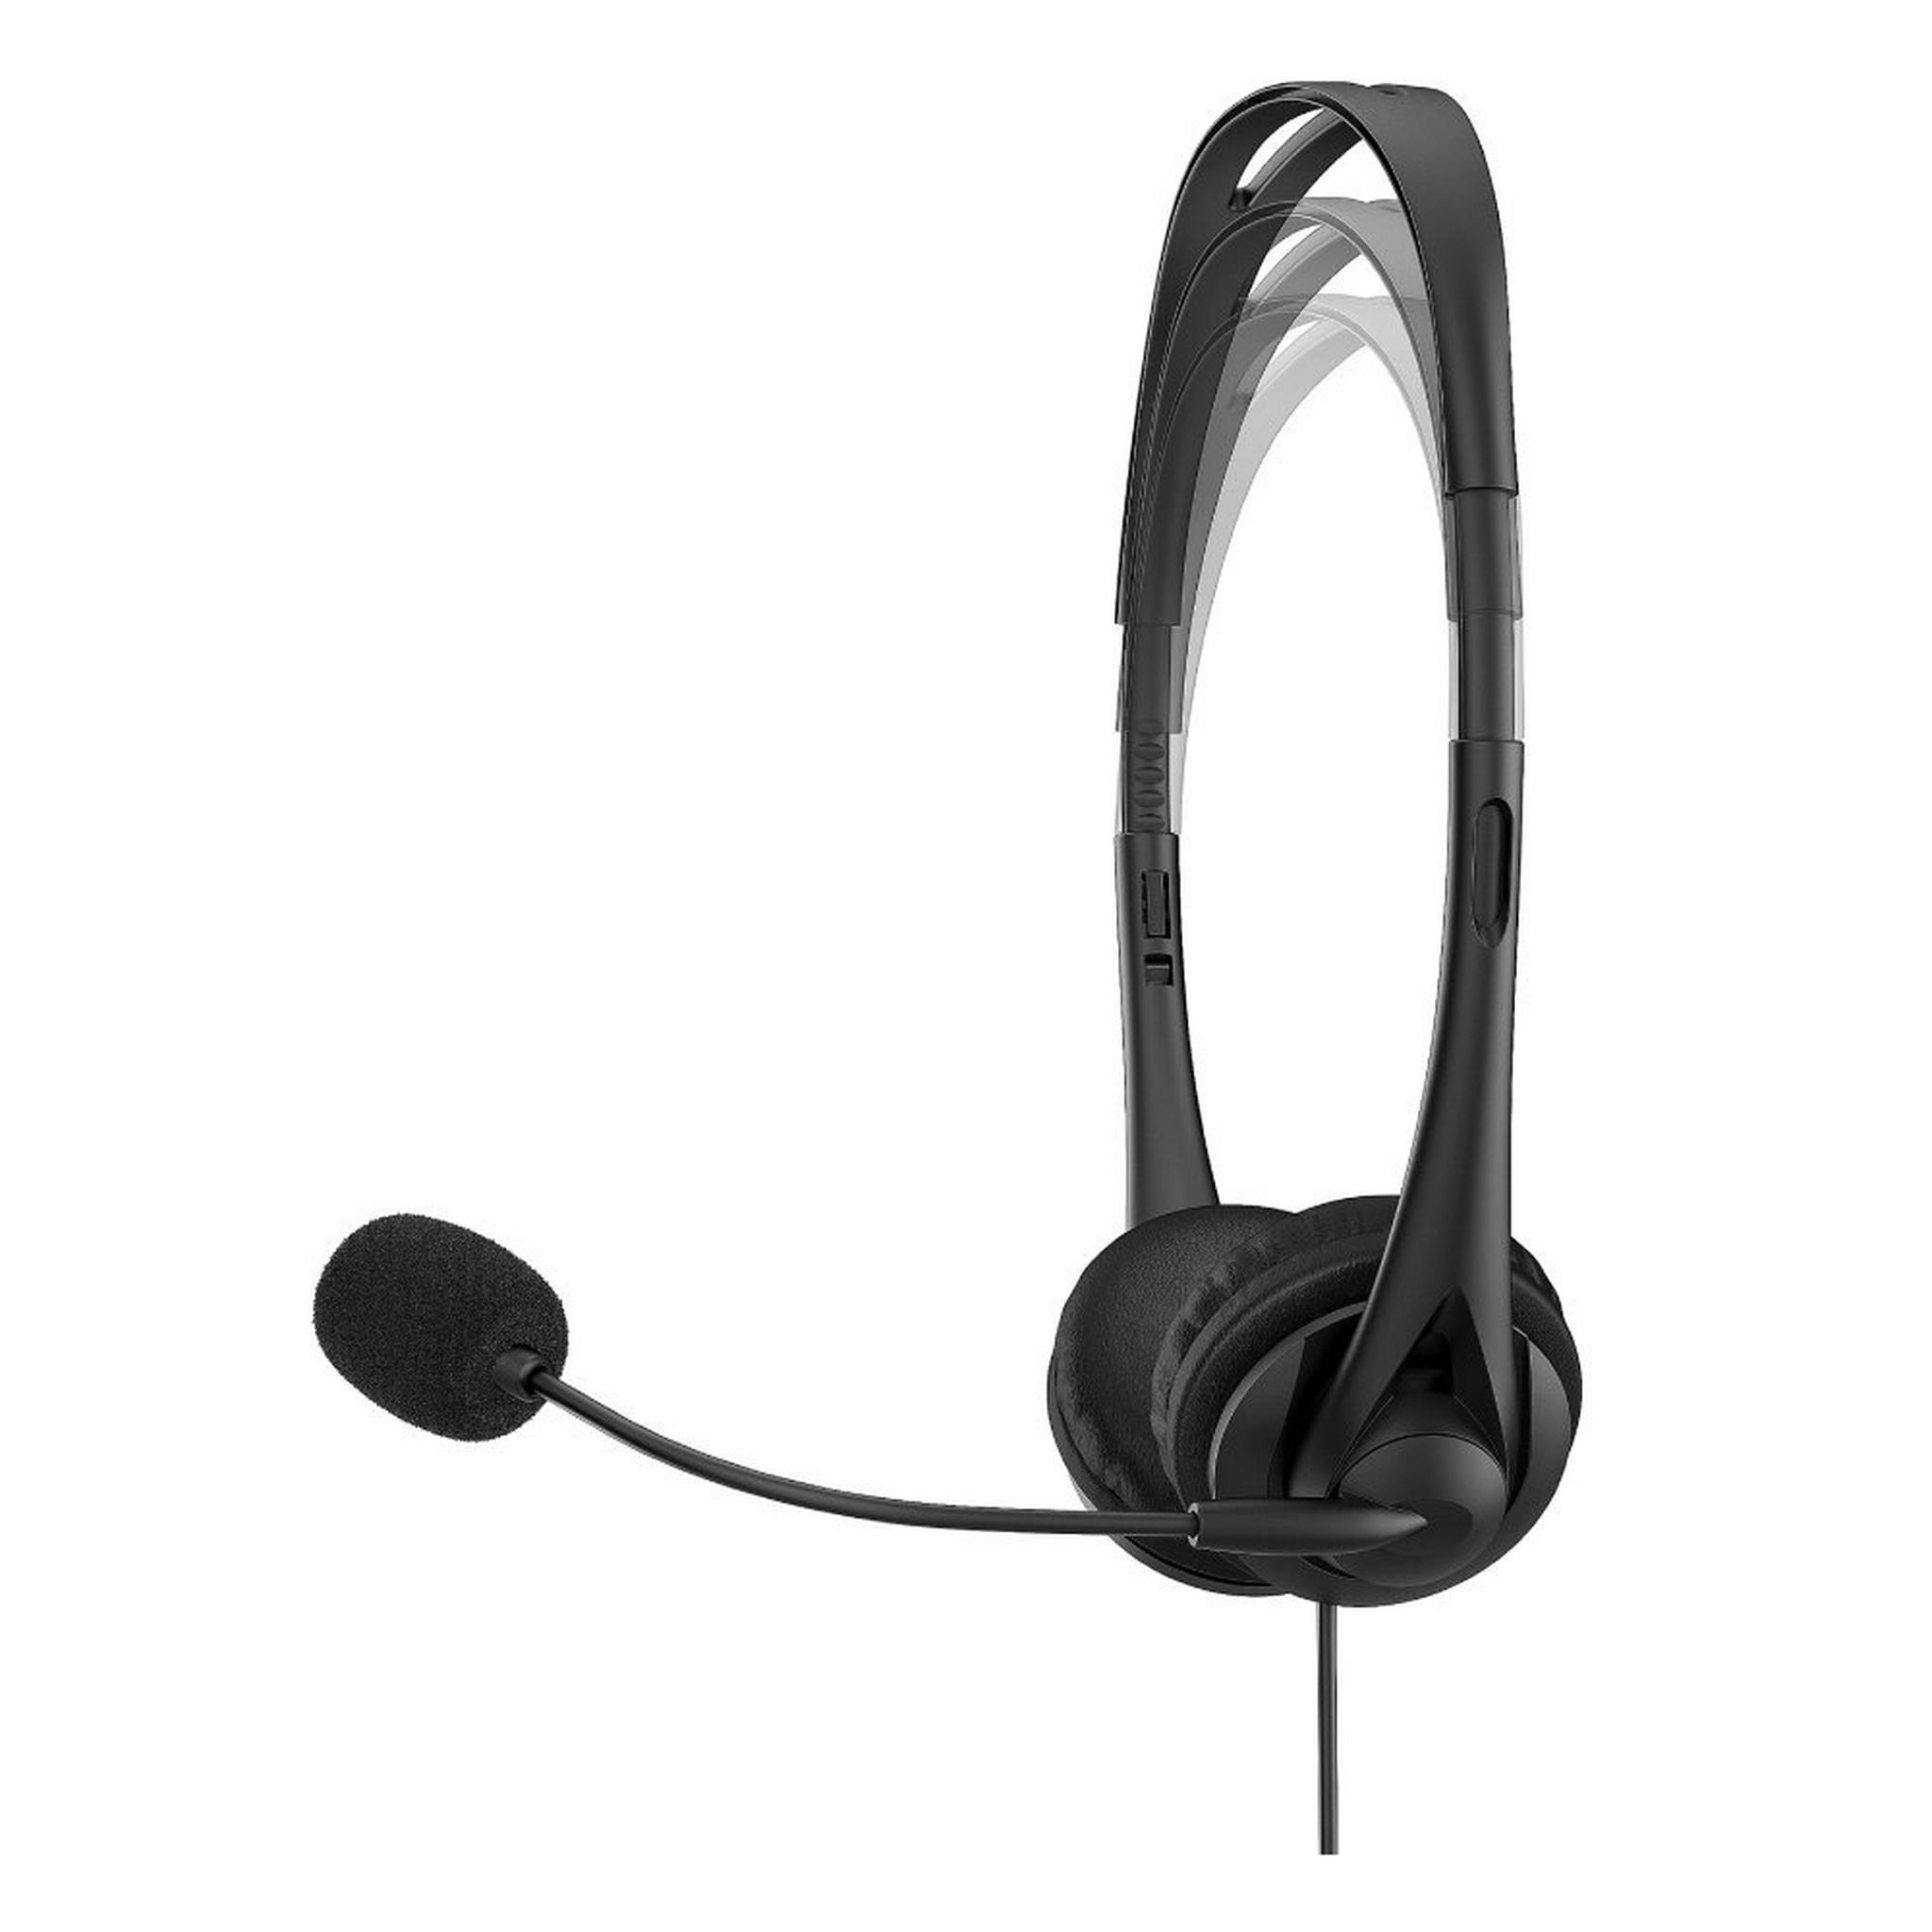 HP Wired 3.5mm Stereo Headset - Black (428H6AA#ABB)